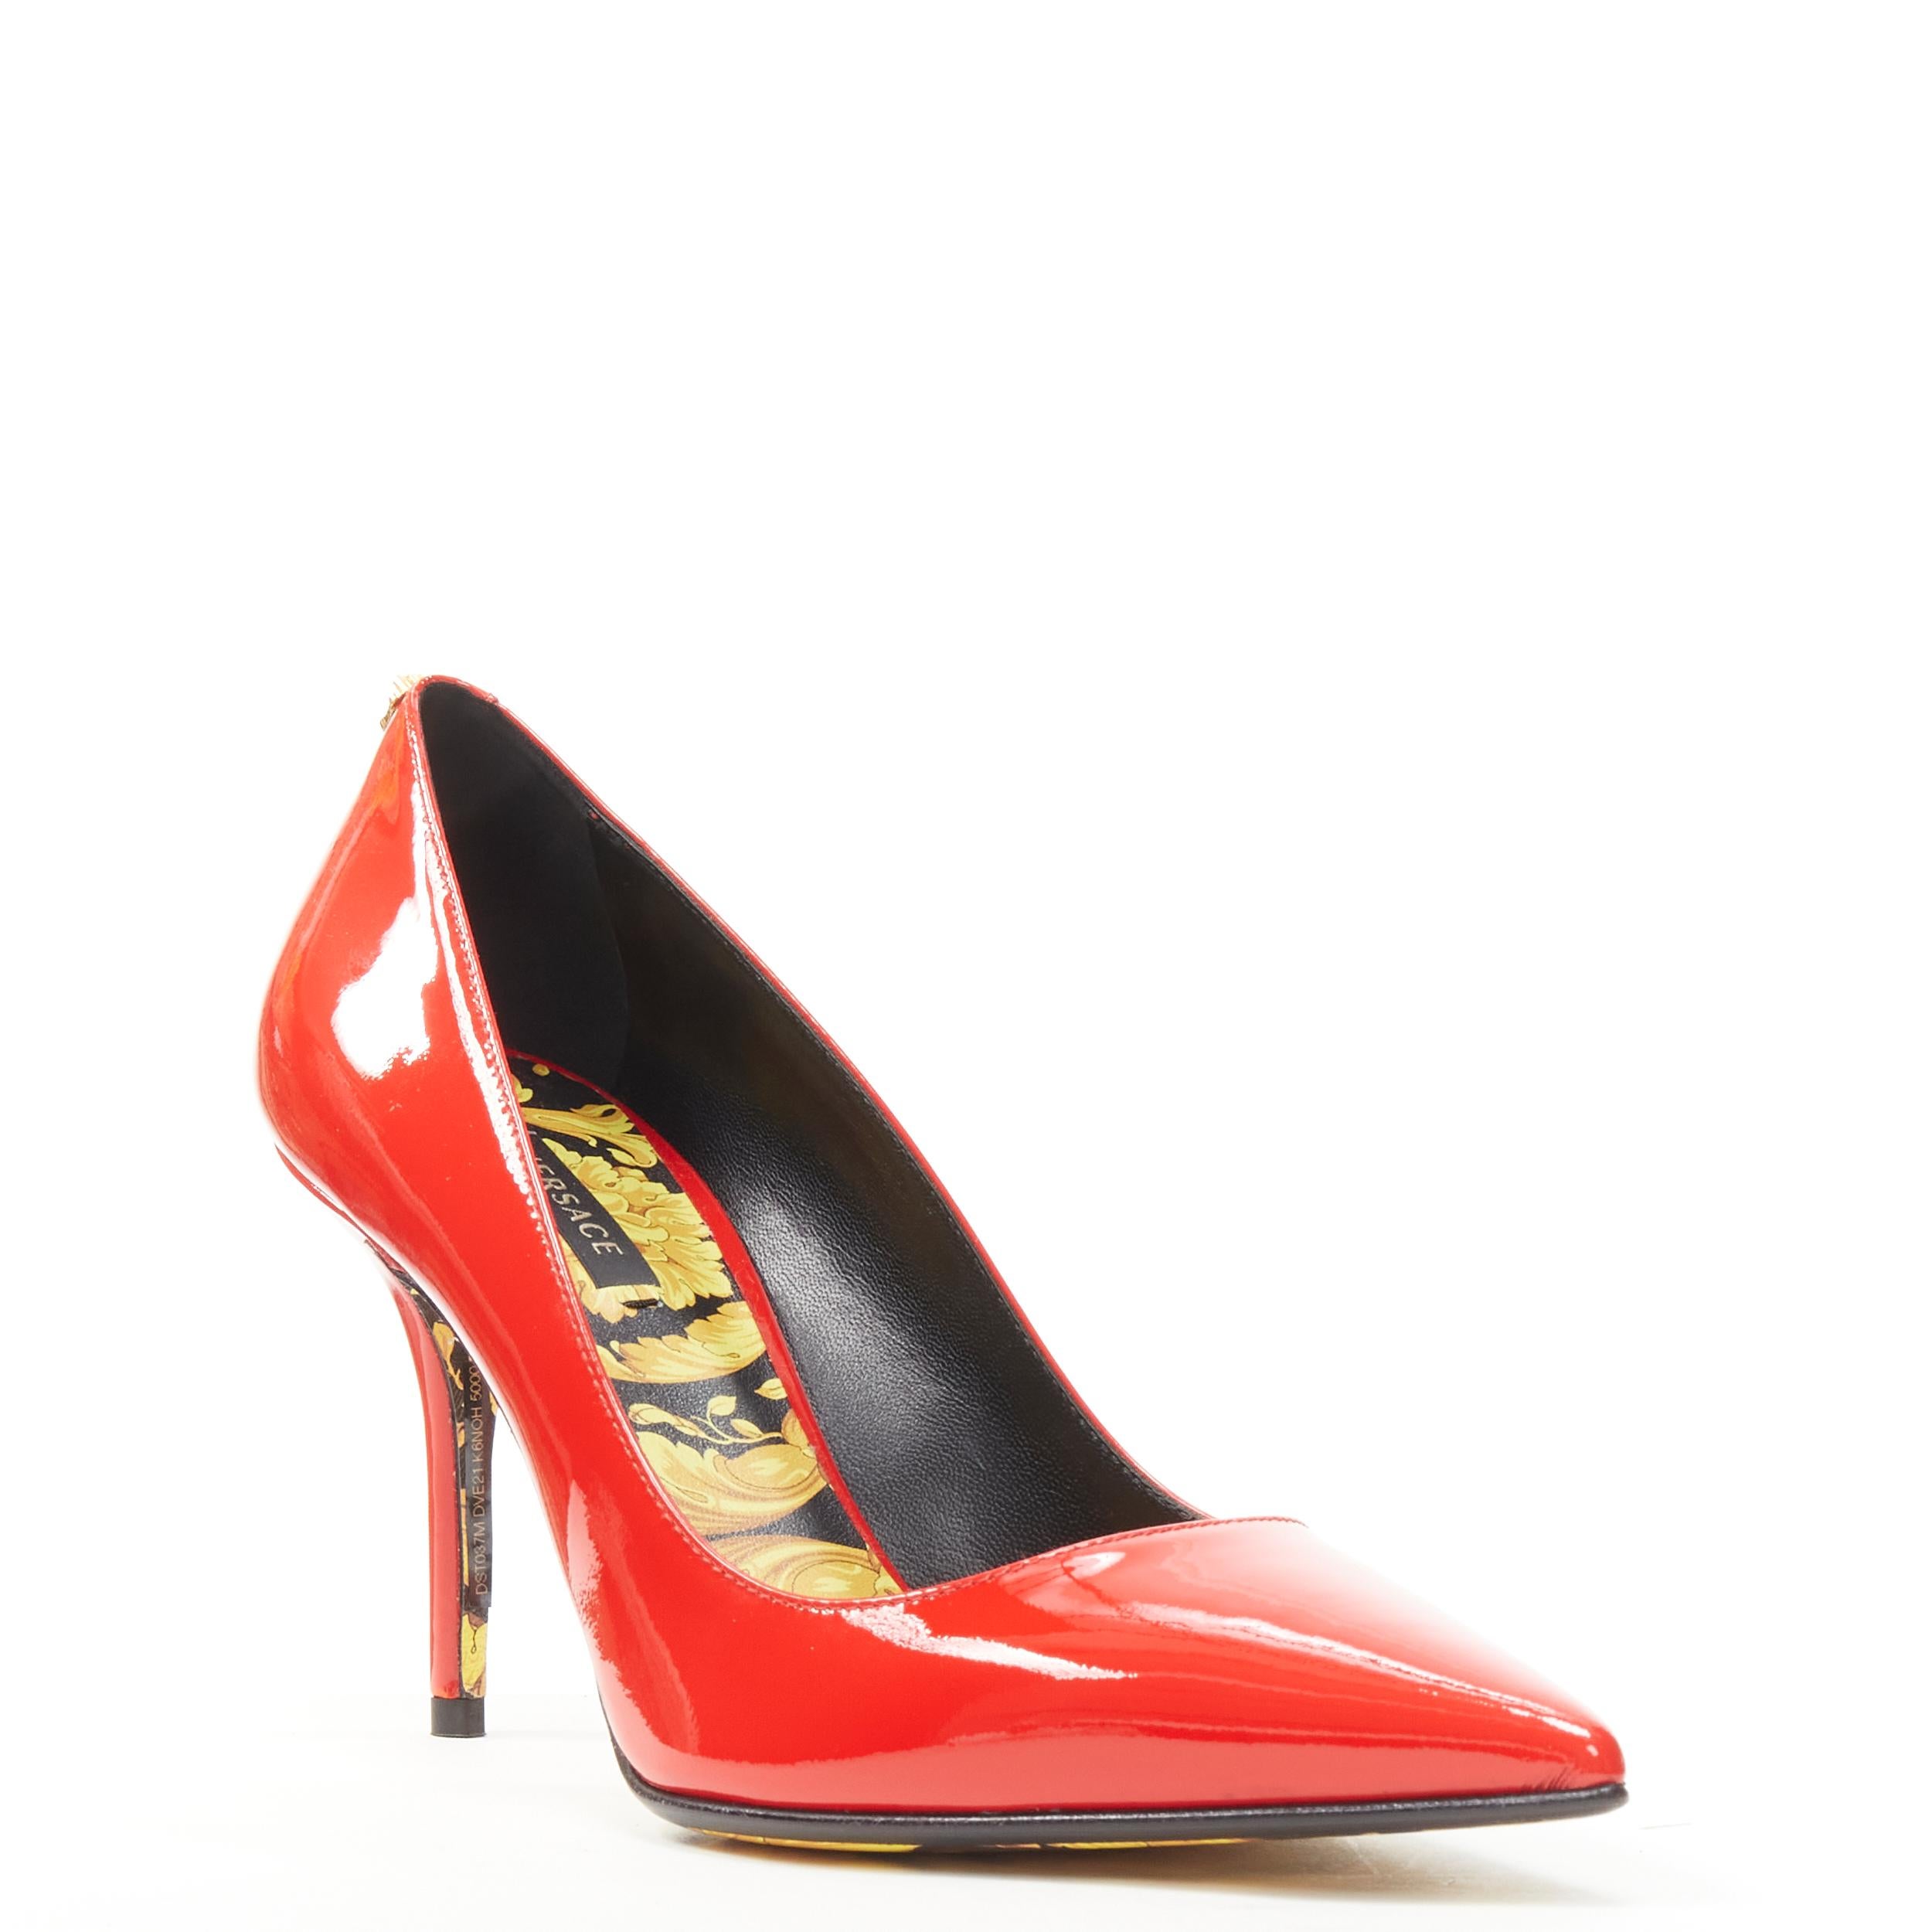 new VERSACE red patent gold Medusa stud Barocco Hibiscus sole pump EU37.5 US7.5 
Reference: TGAS/C00365 
Brand: Versace 
Designer: Donatella Versace 
Model: DST037M DVE21 K5NOH RED BAROCCO SOLE 
Material: Patent Leather 
Color: Red 
Pattern: Solid